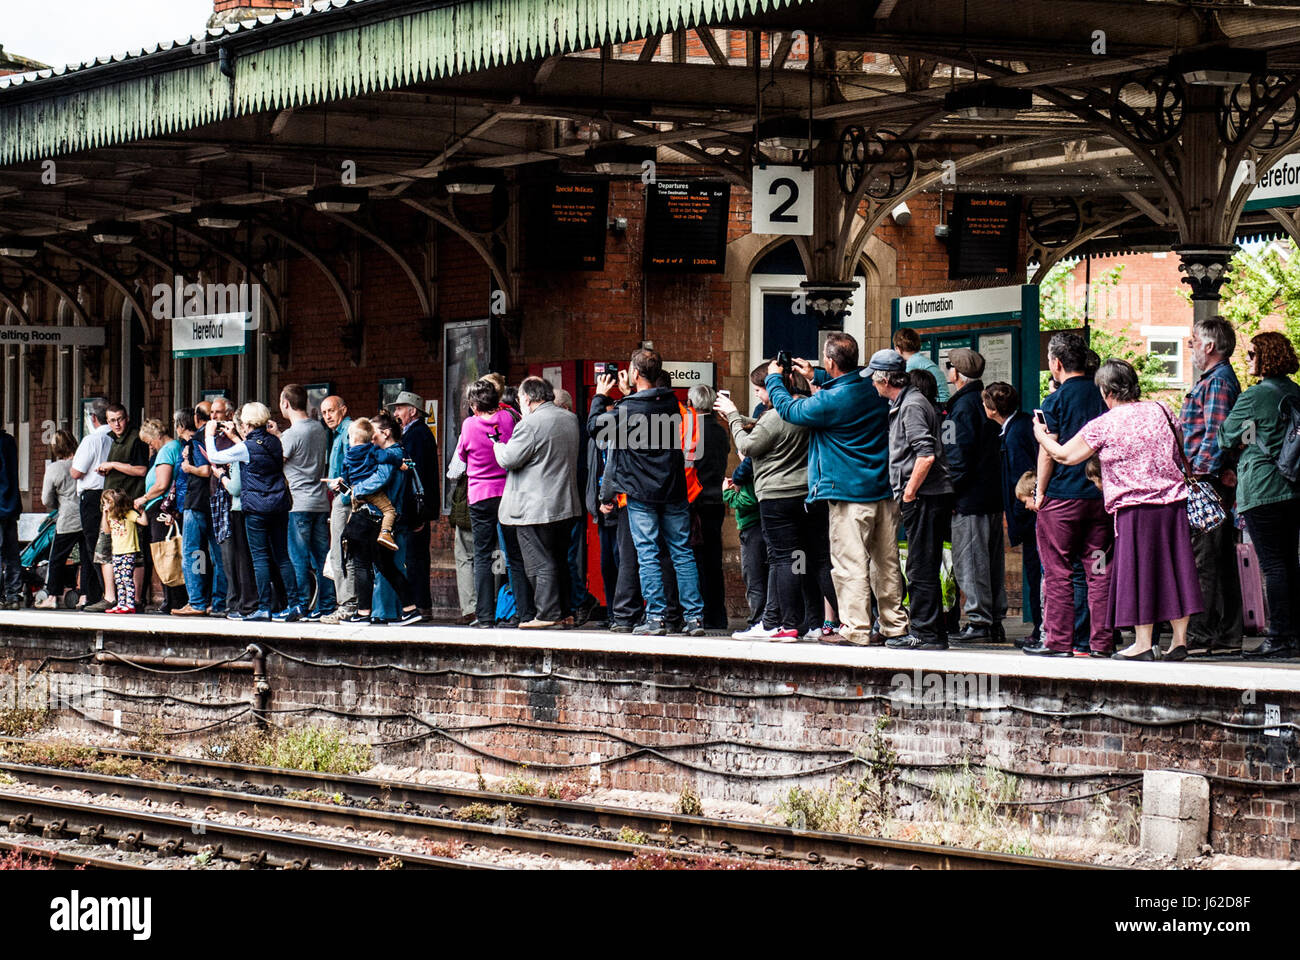 Hereford, Herefordshire. 19th May 2017. Crowds gather to see Pacific steam locomotive LNER Class A3 4472 commonly known as the Flying Scotsman at Hereford railway station as it travels from Shrewsbury to Cardiff and then Newport to Bristol Parkway via Gloucester. The 94 year old Flying Scotsman was originally built in Doncaster for the London and North Eastern Railway (LNER), emerging from the works on 24 February 1923. Credit: Jim Wood/Alamy Live News Stock Photo